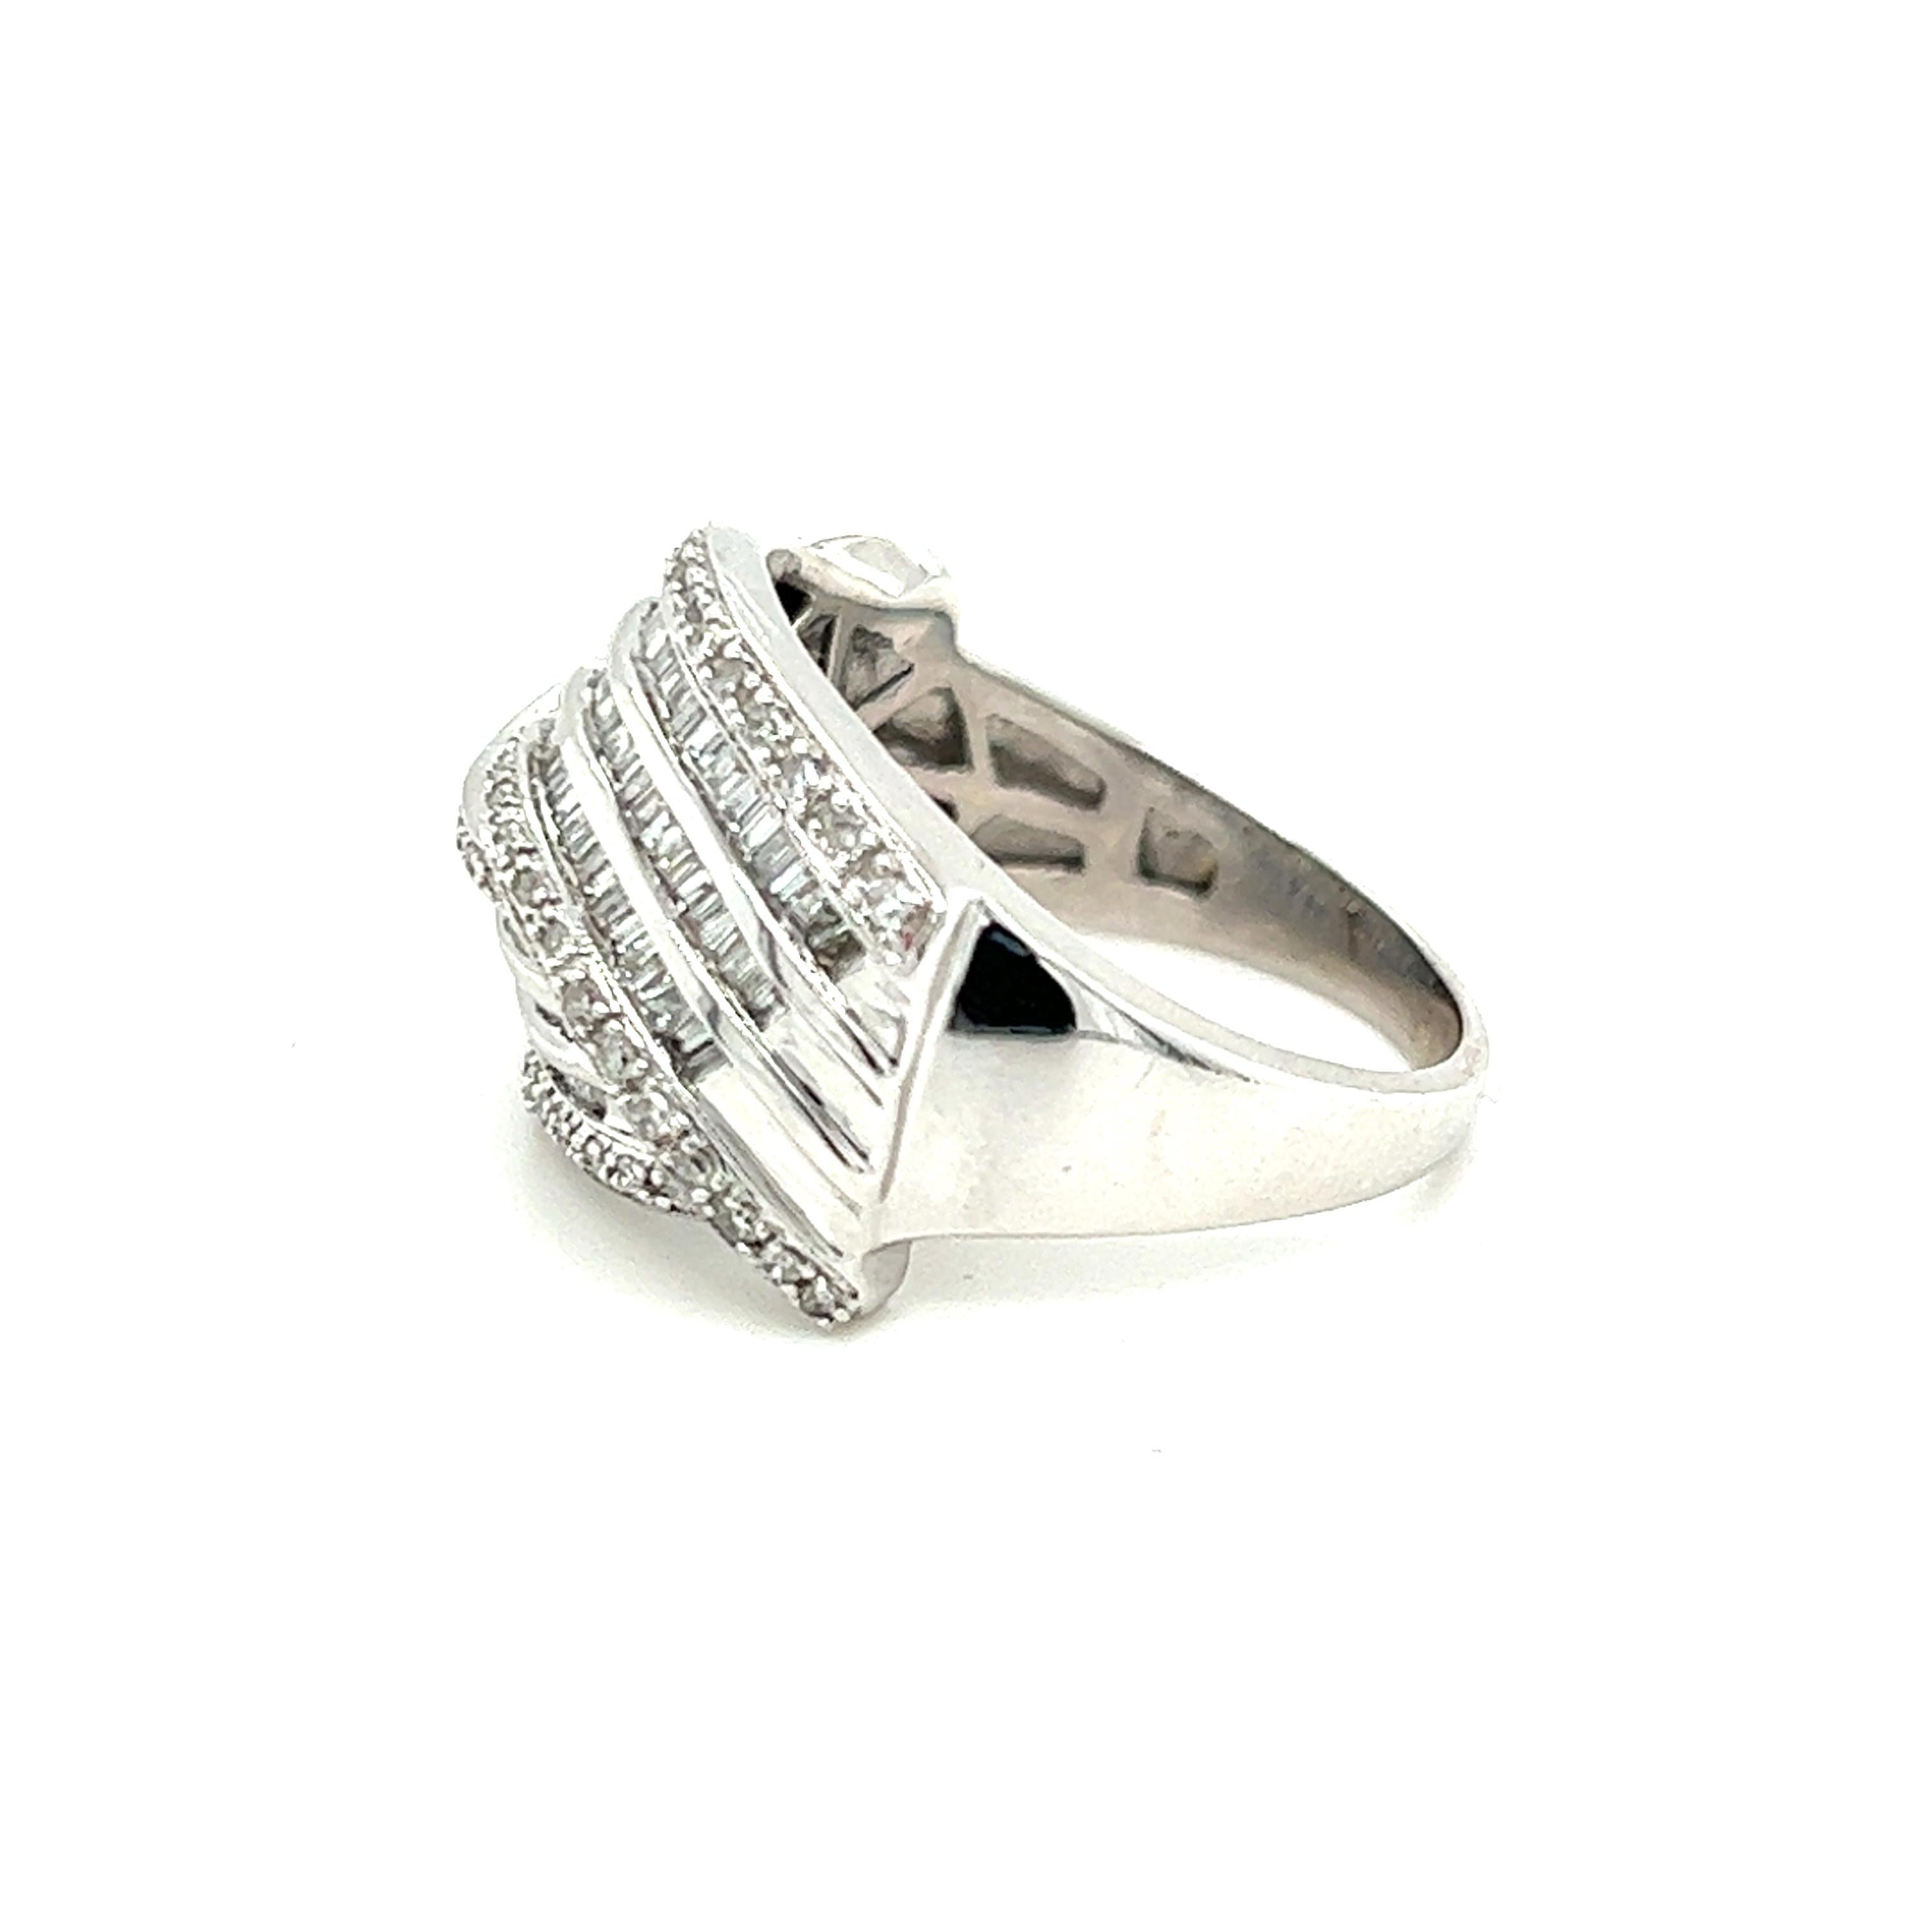 Contemporary 1.50 Carat Total Weight Diamond Ring in 14k White Gold For Sale